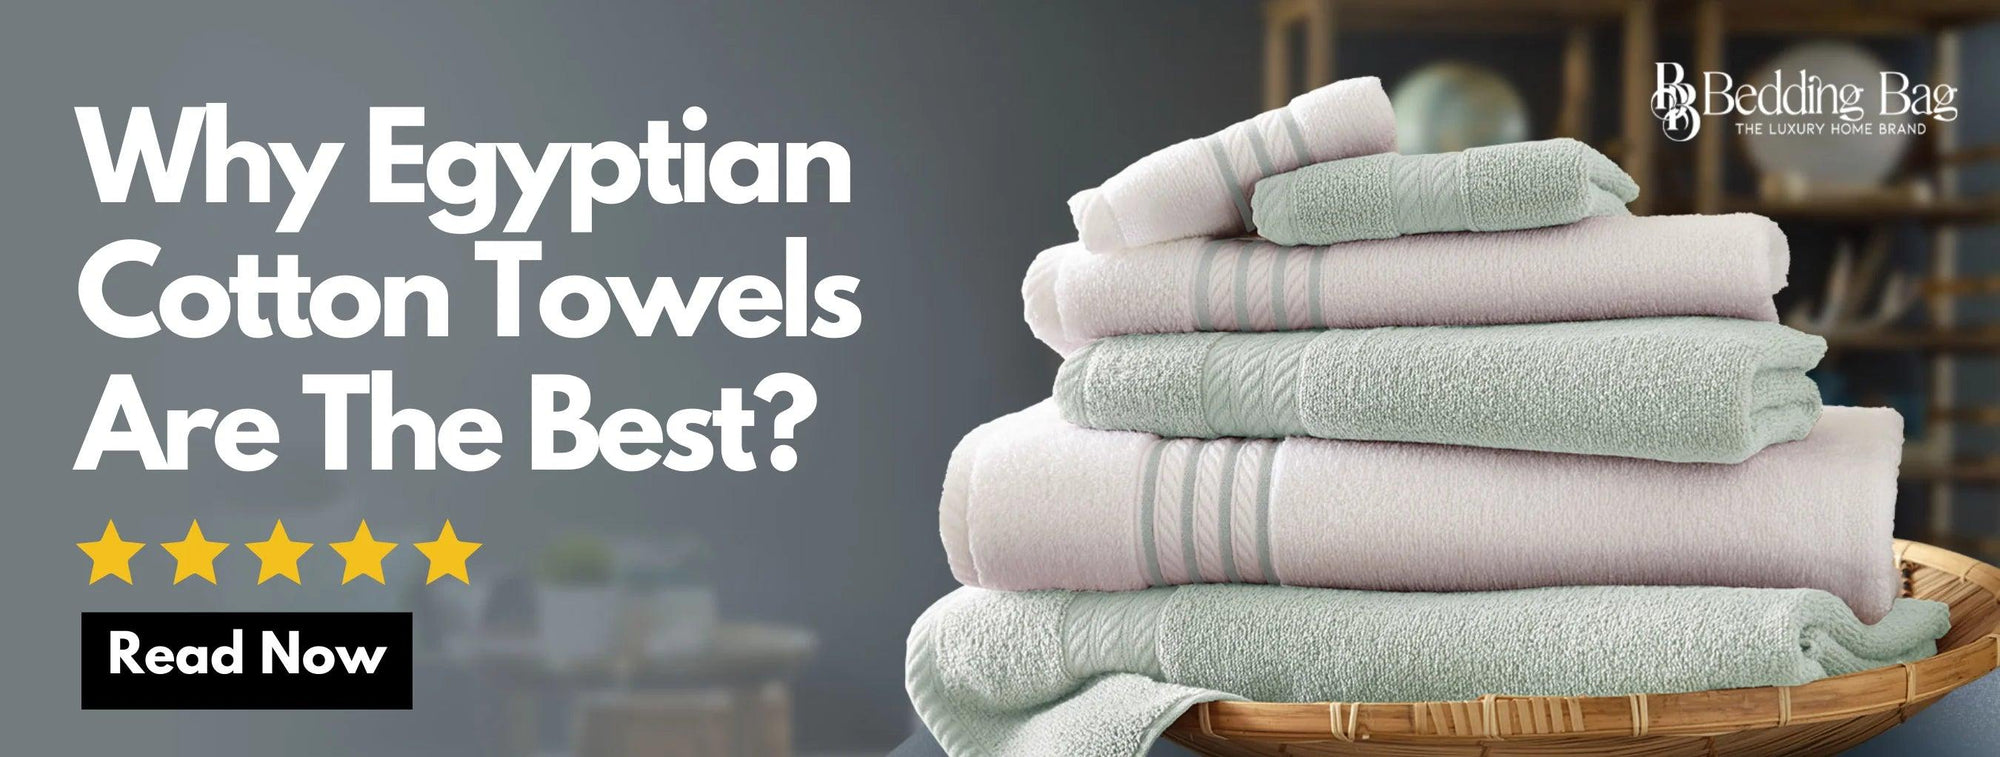 WHY EGYPTIAN COTTON TOWELS ARE THE BEST